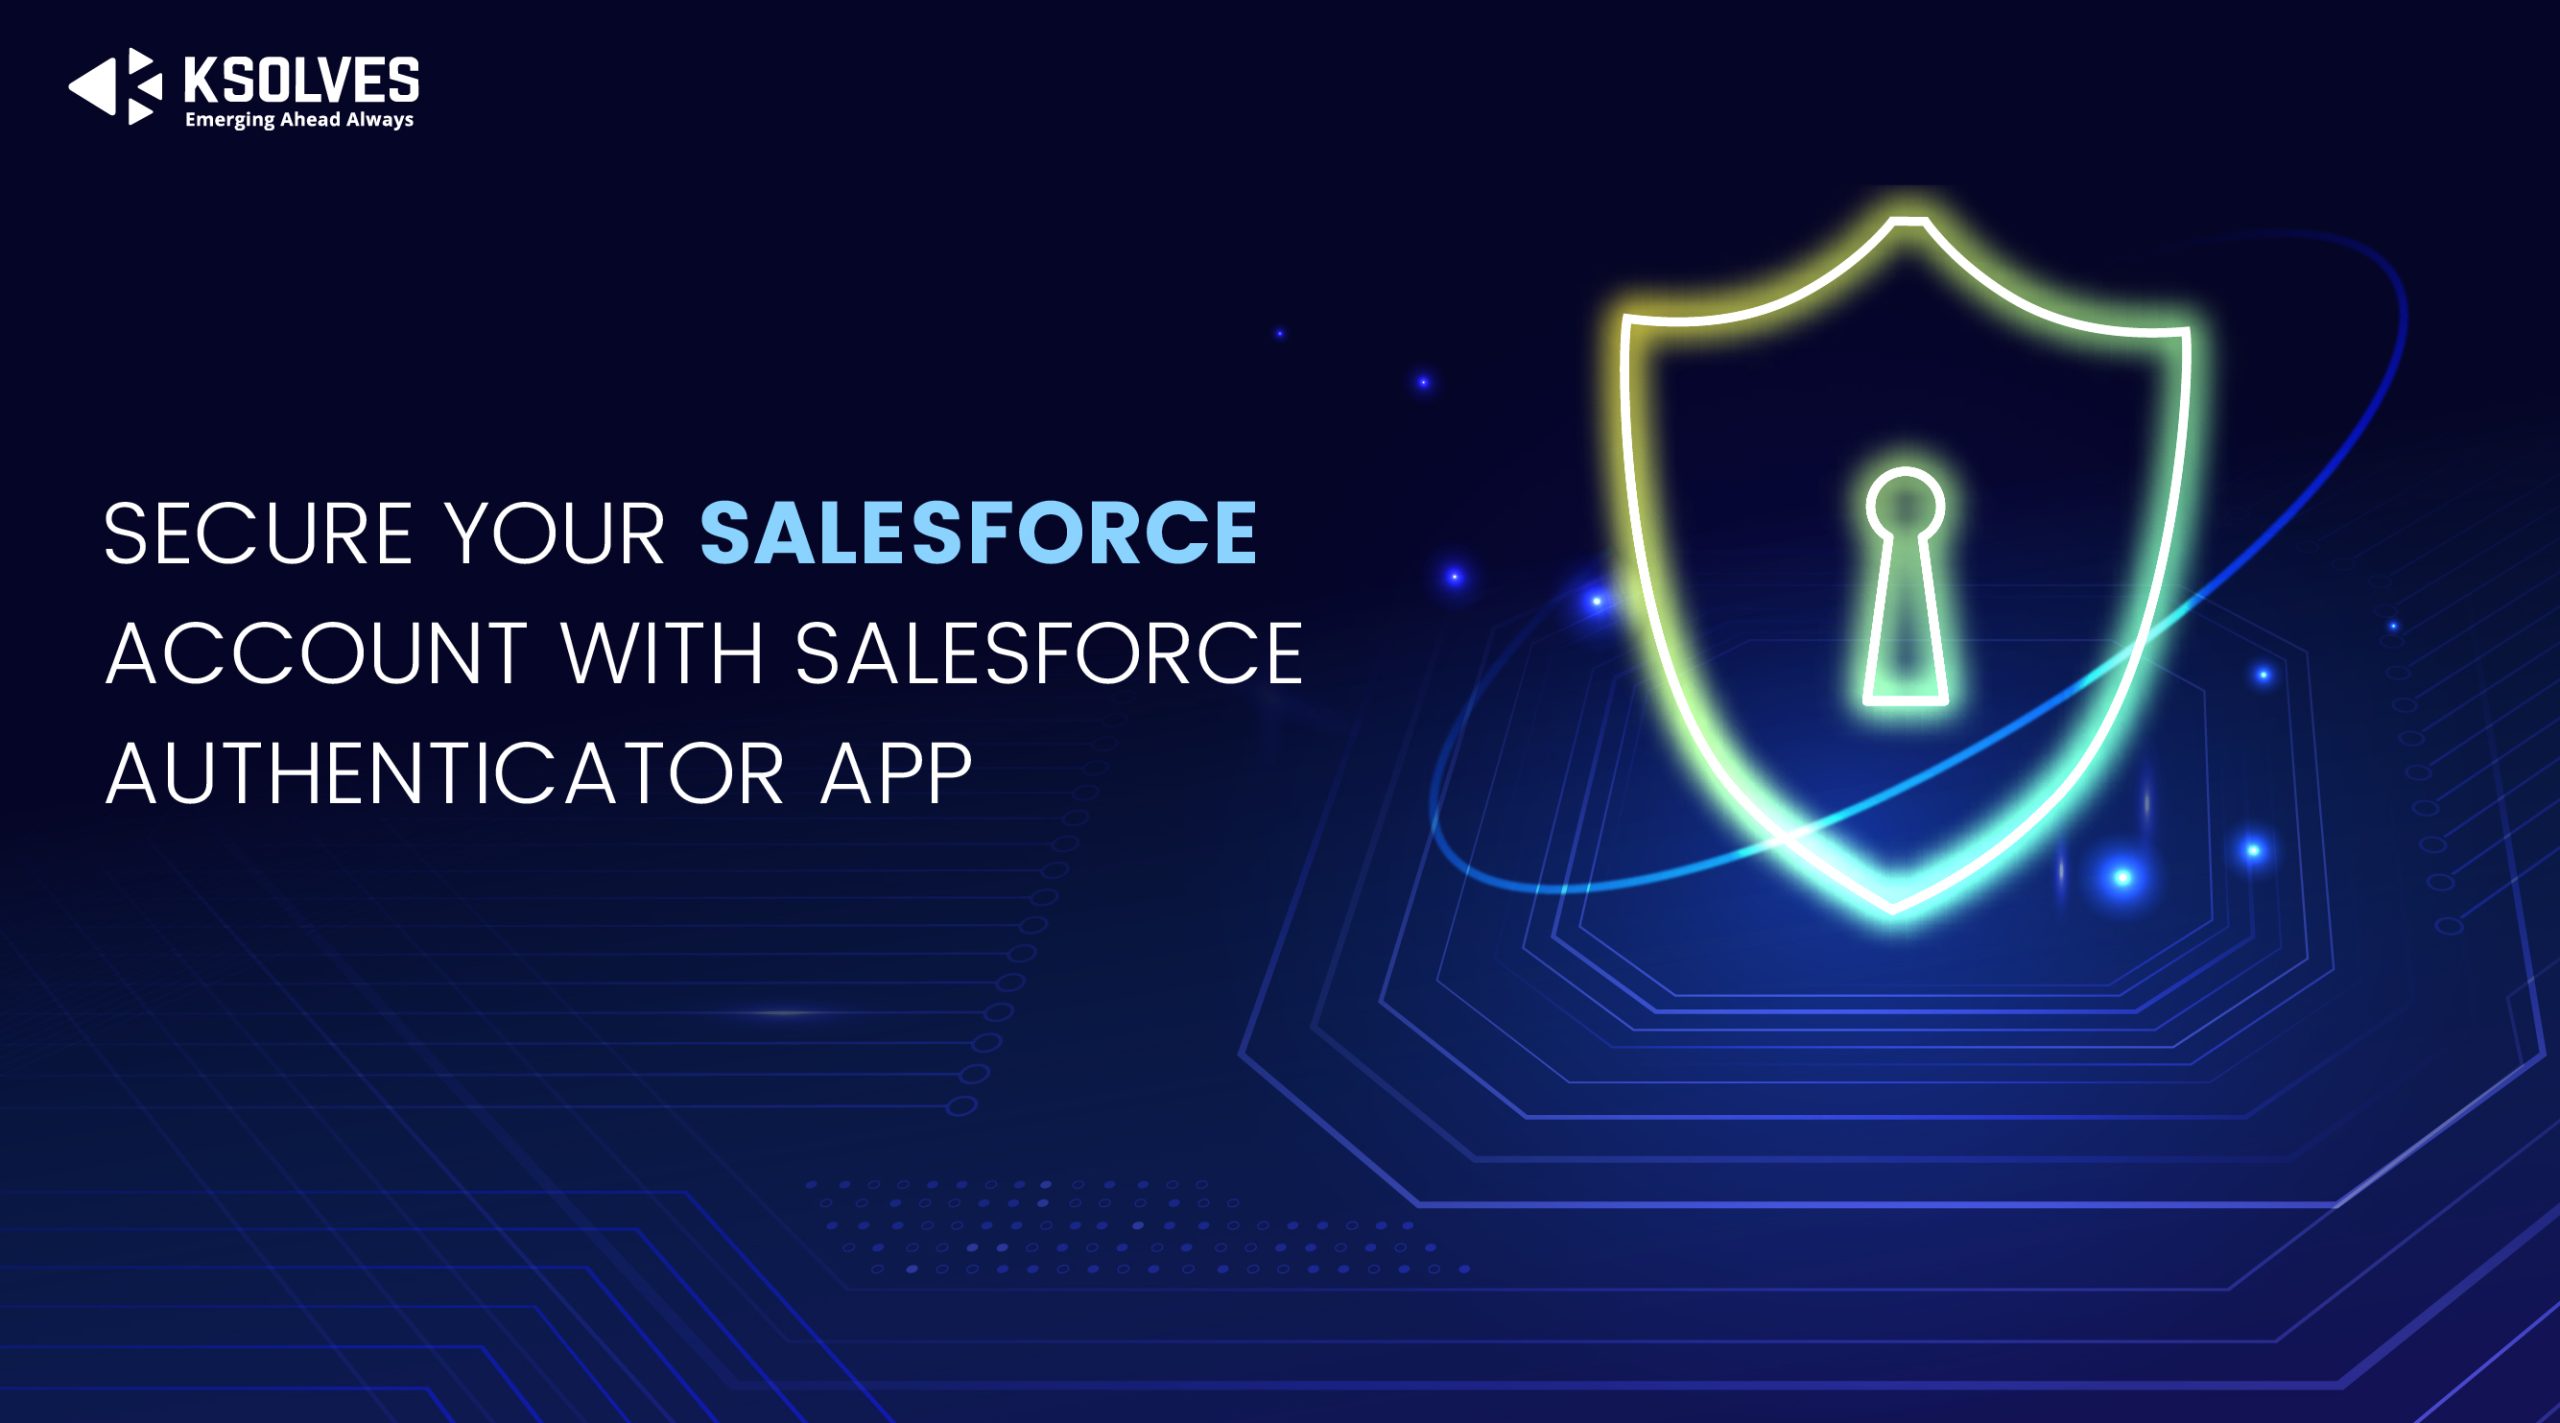 Secure Your Salesforce Account With Salesforce Authenticator App